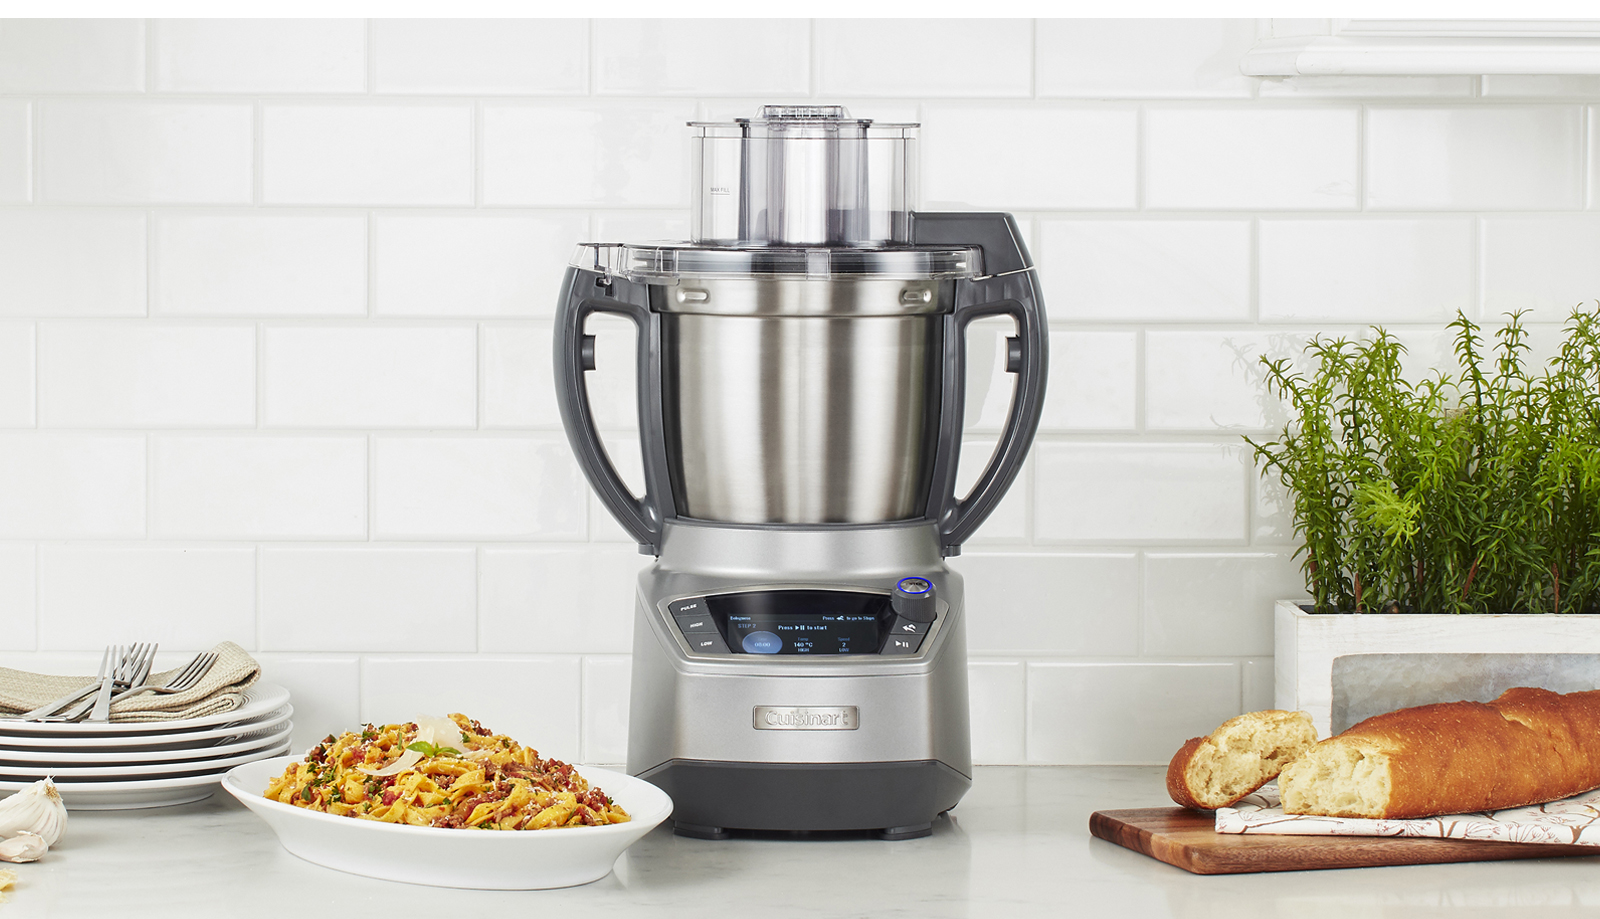 Cuisinart Food Processor Was A Great Gift For Mom’s Birthday!